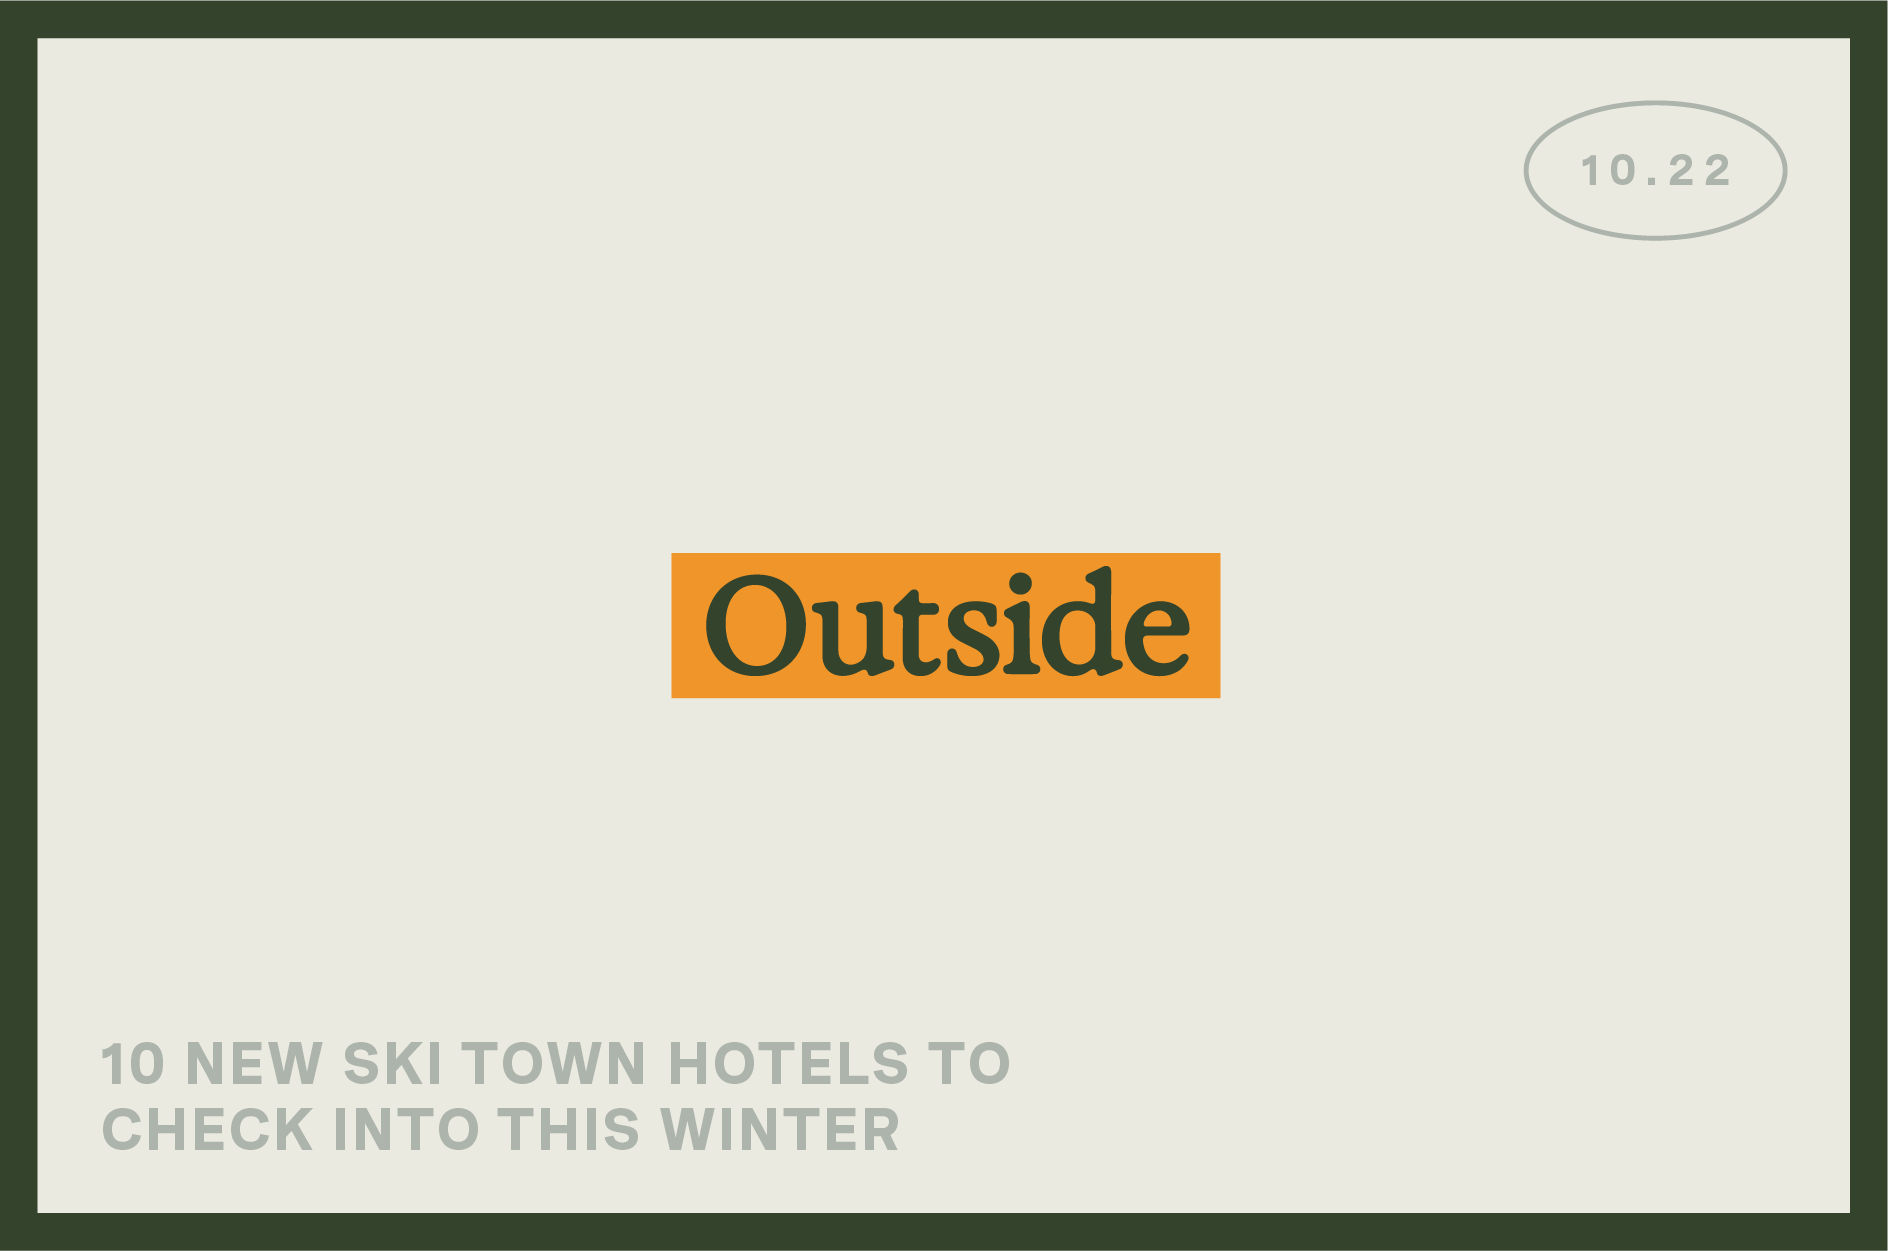 "Outside" banner features "10 New SKI Town Hotels to check into this winter."